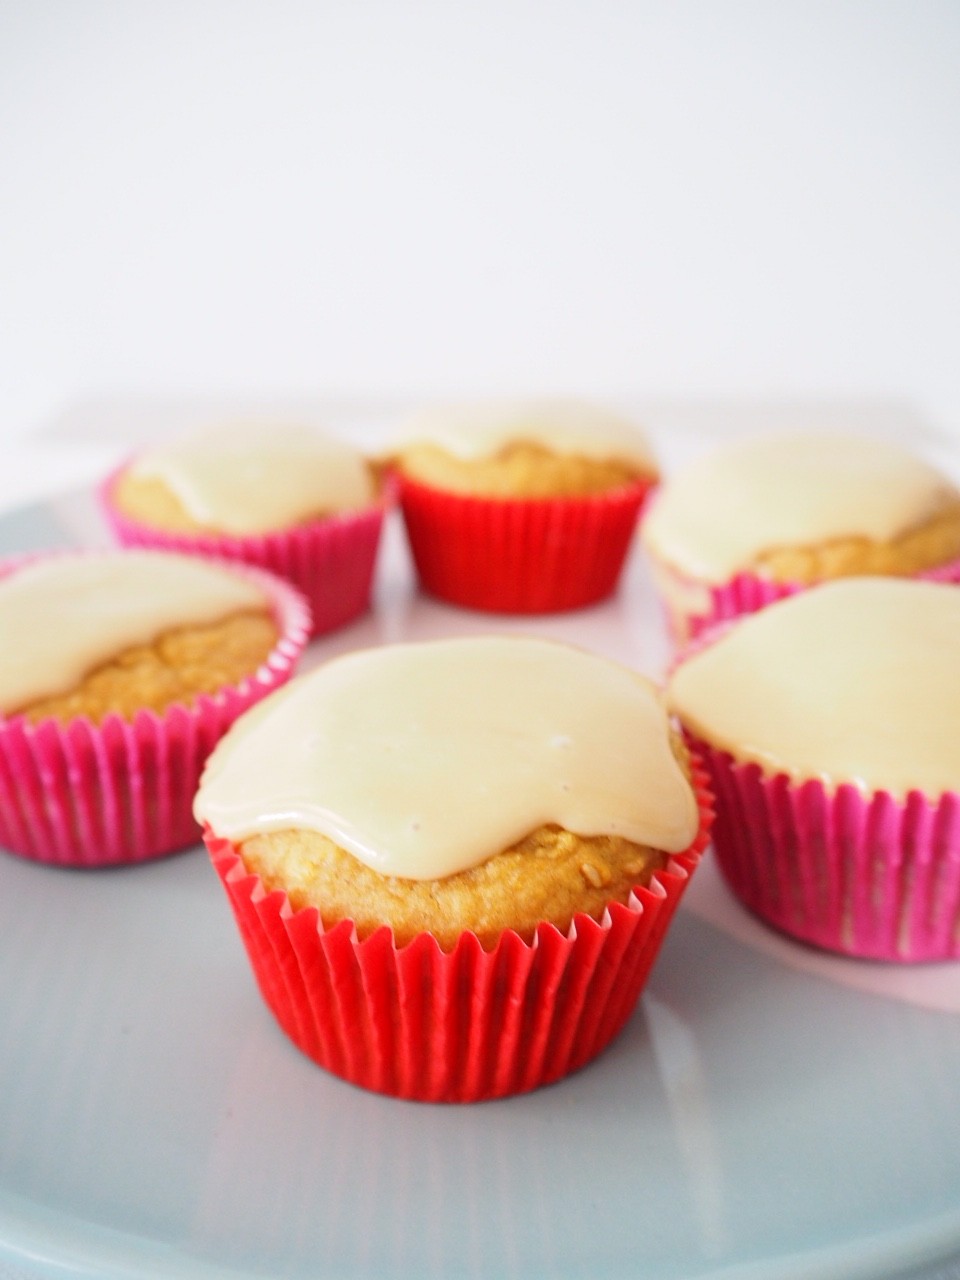 Sweet Potato and Oat Muffins with Caramel Cream Cheese Icing